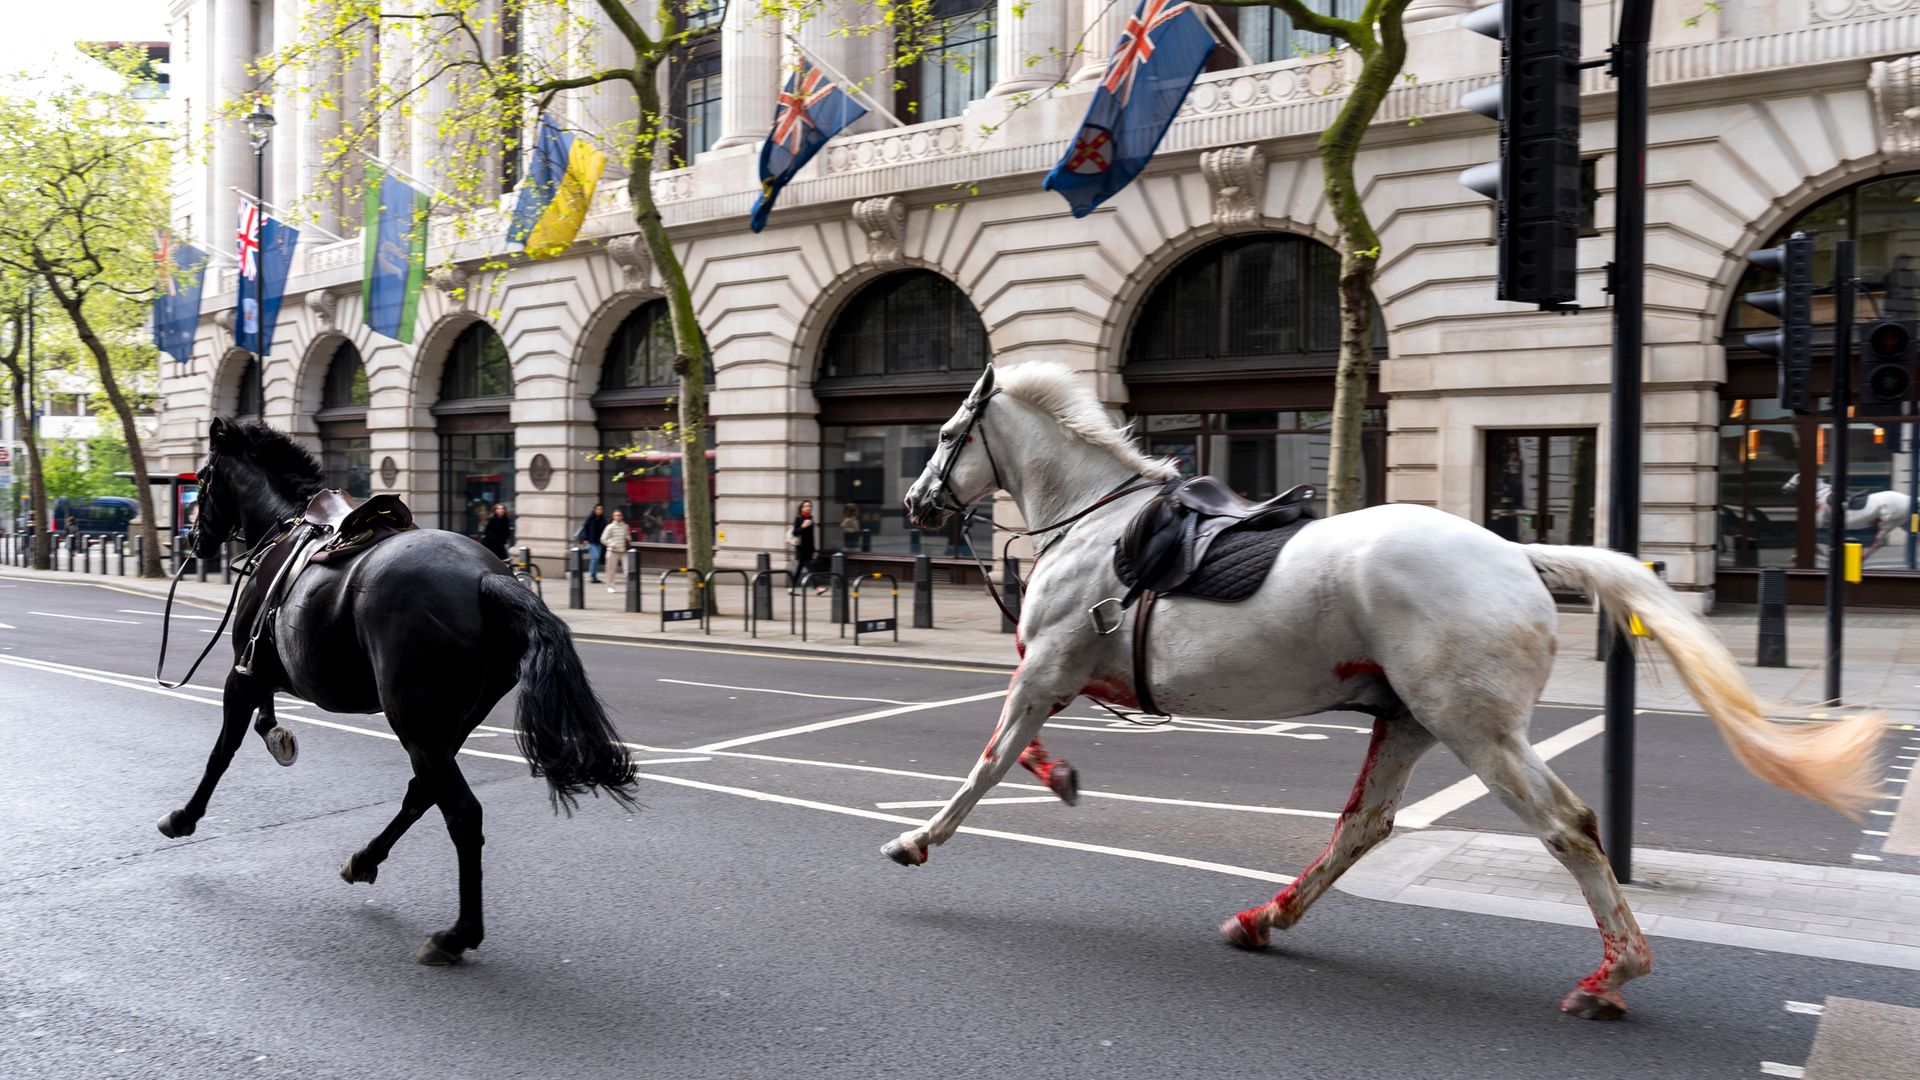 Two horses that bolted through central London in a 'serious condition' - as animals named